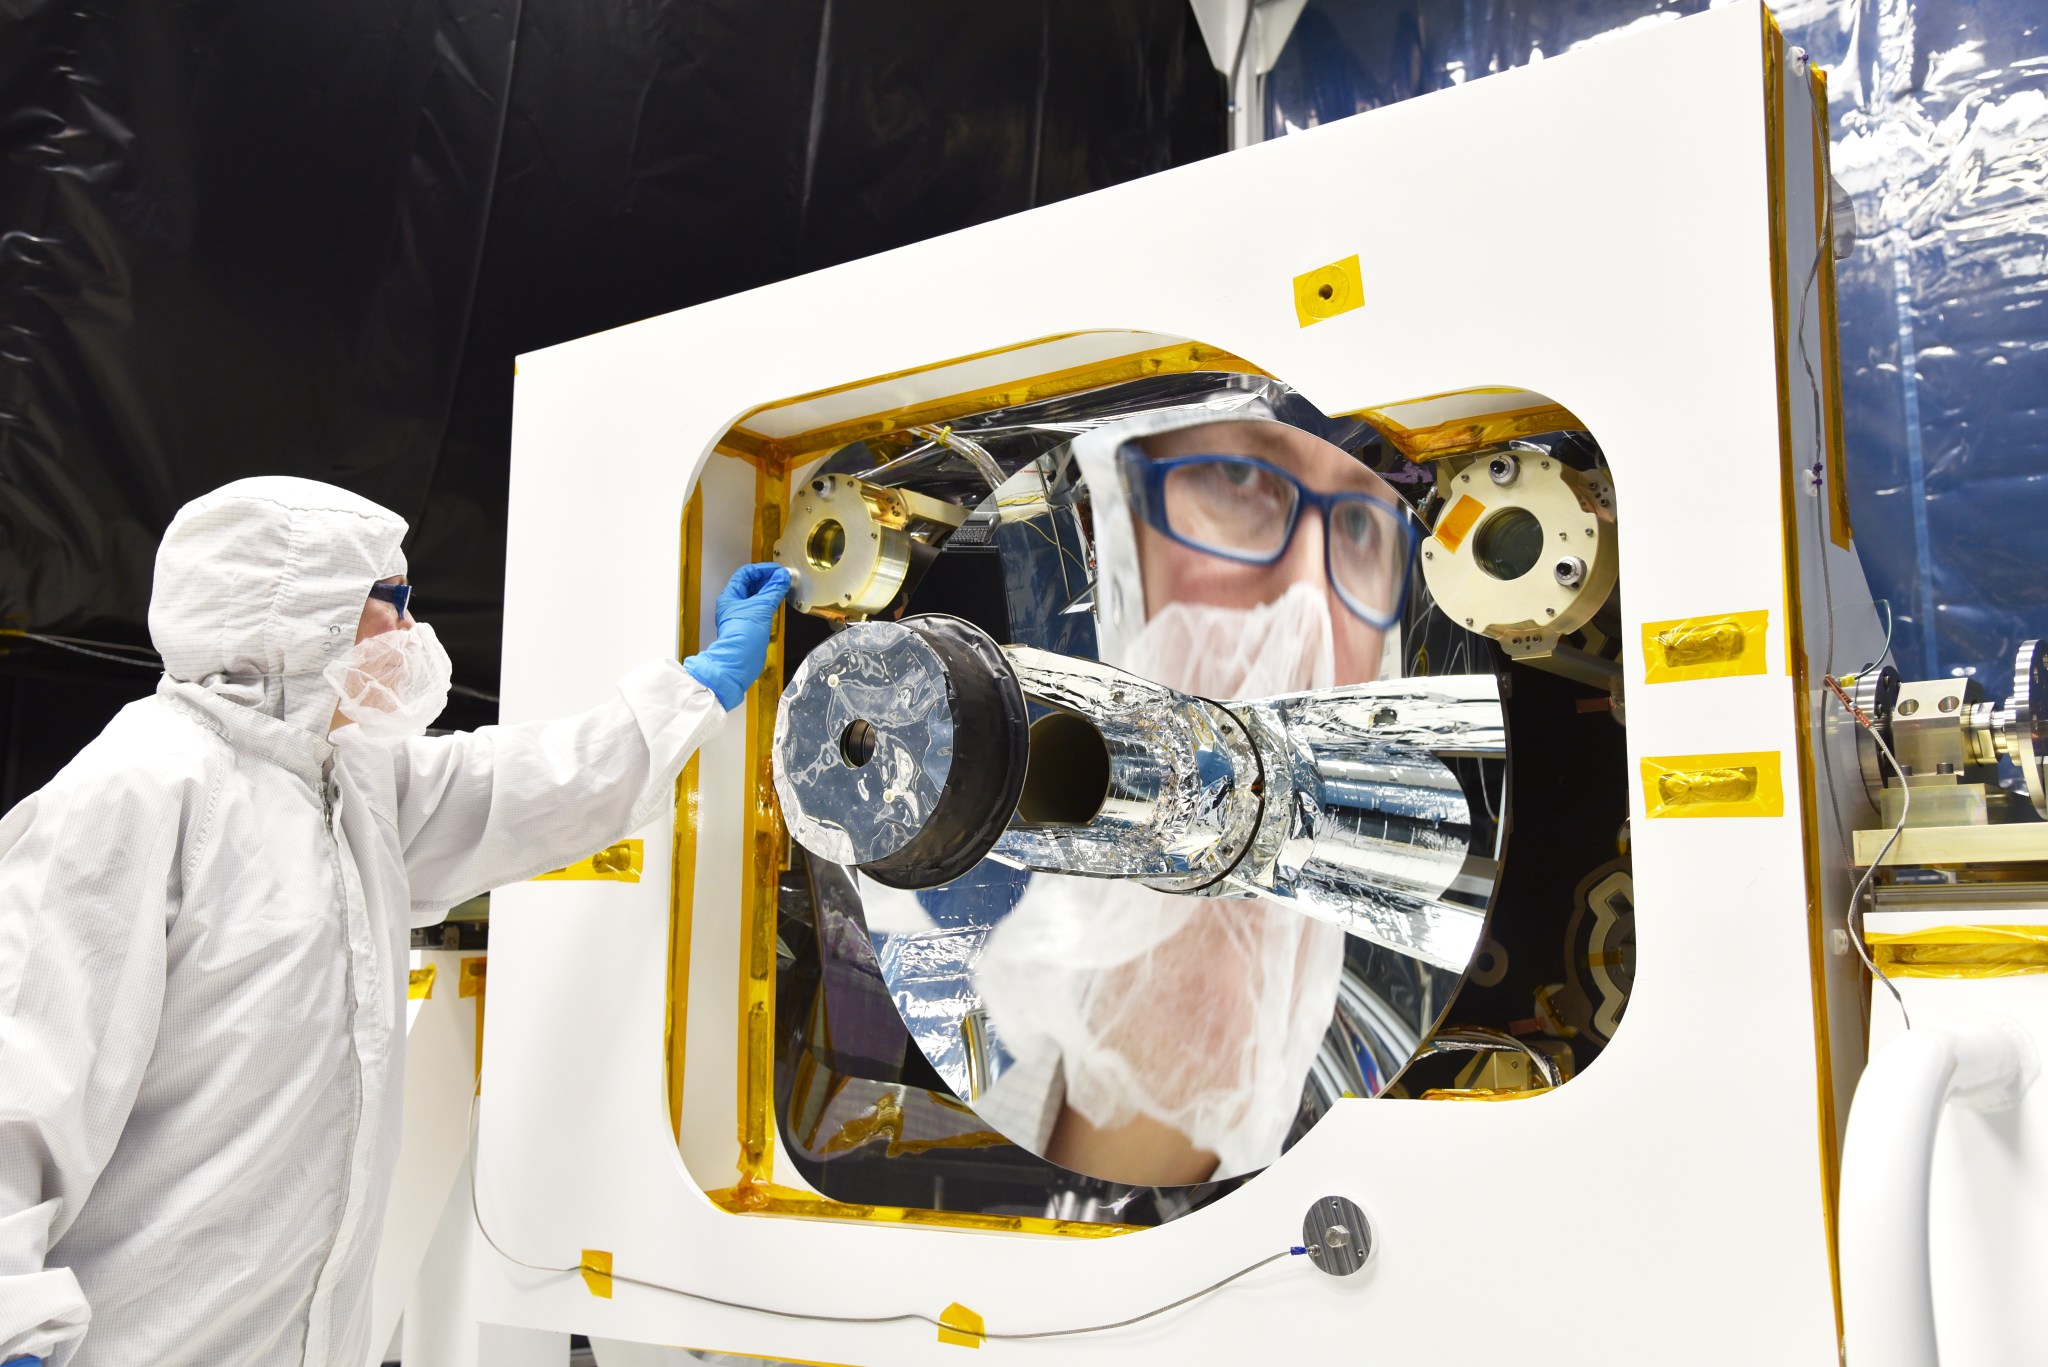 GEDI receiver telescope in the clean room, scientist wearing clean room suit looking into mirror and reflection is shown much larger. The scientist is wearing blue glasses and the mirror is round with an instrument in the center. 